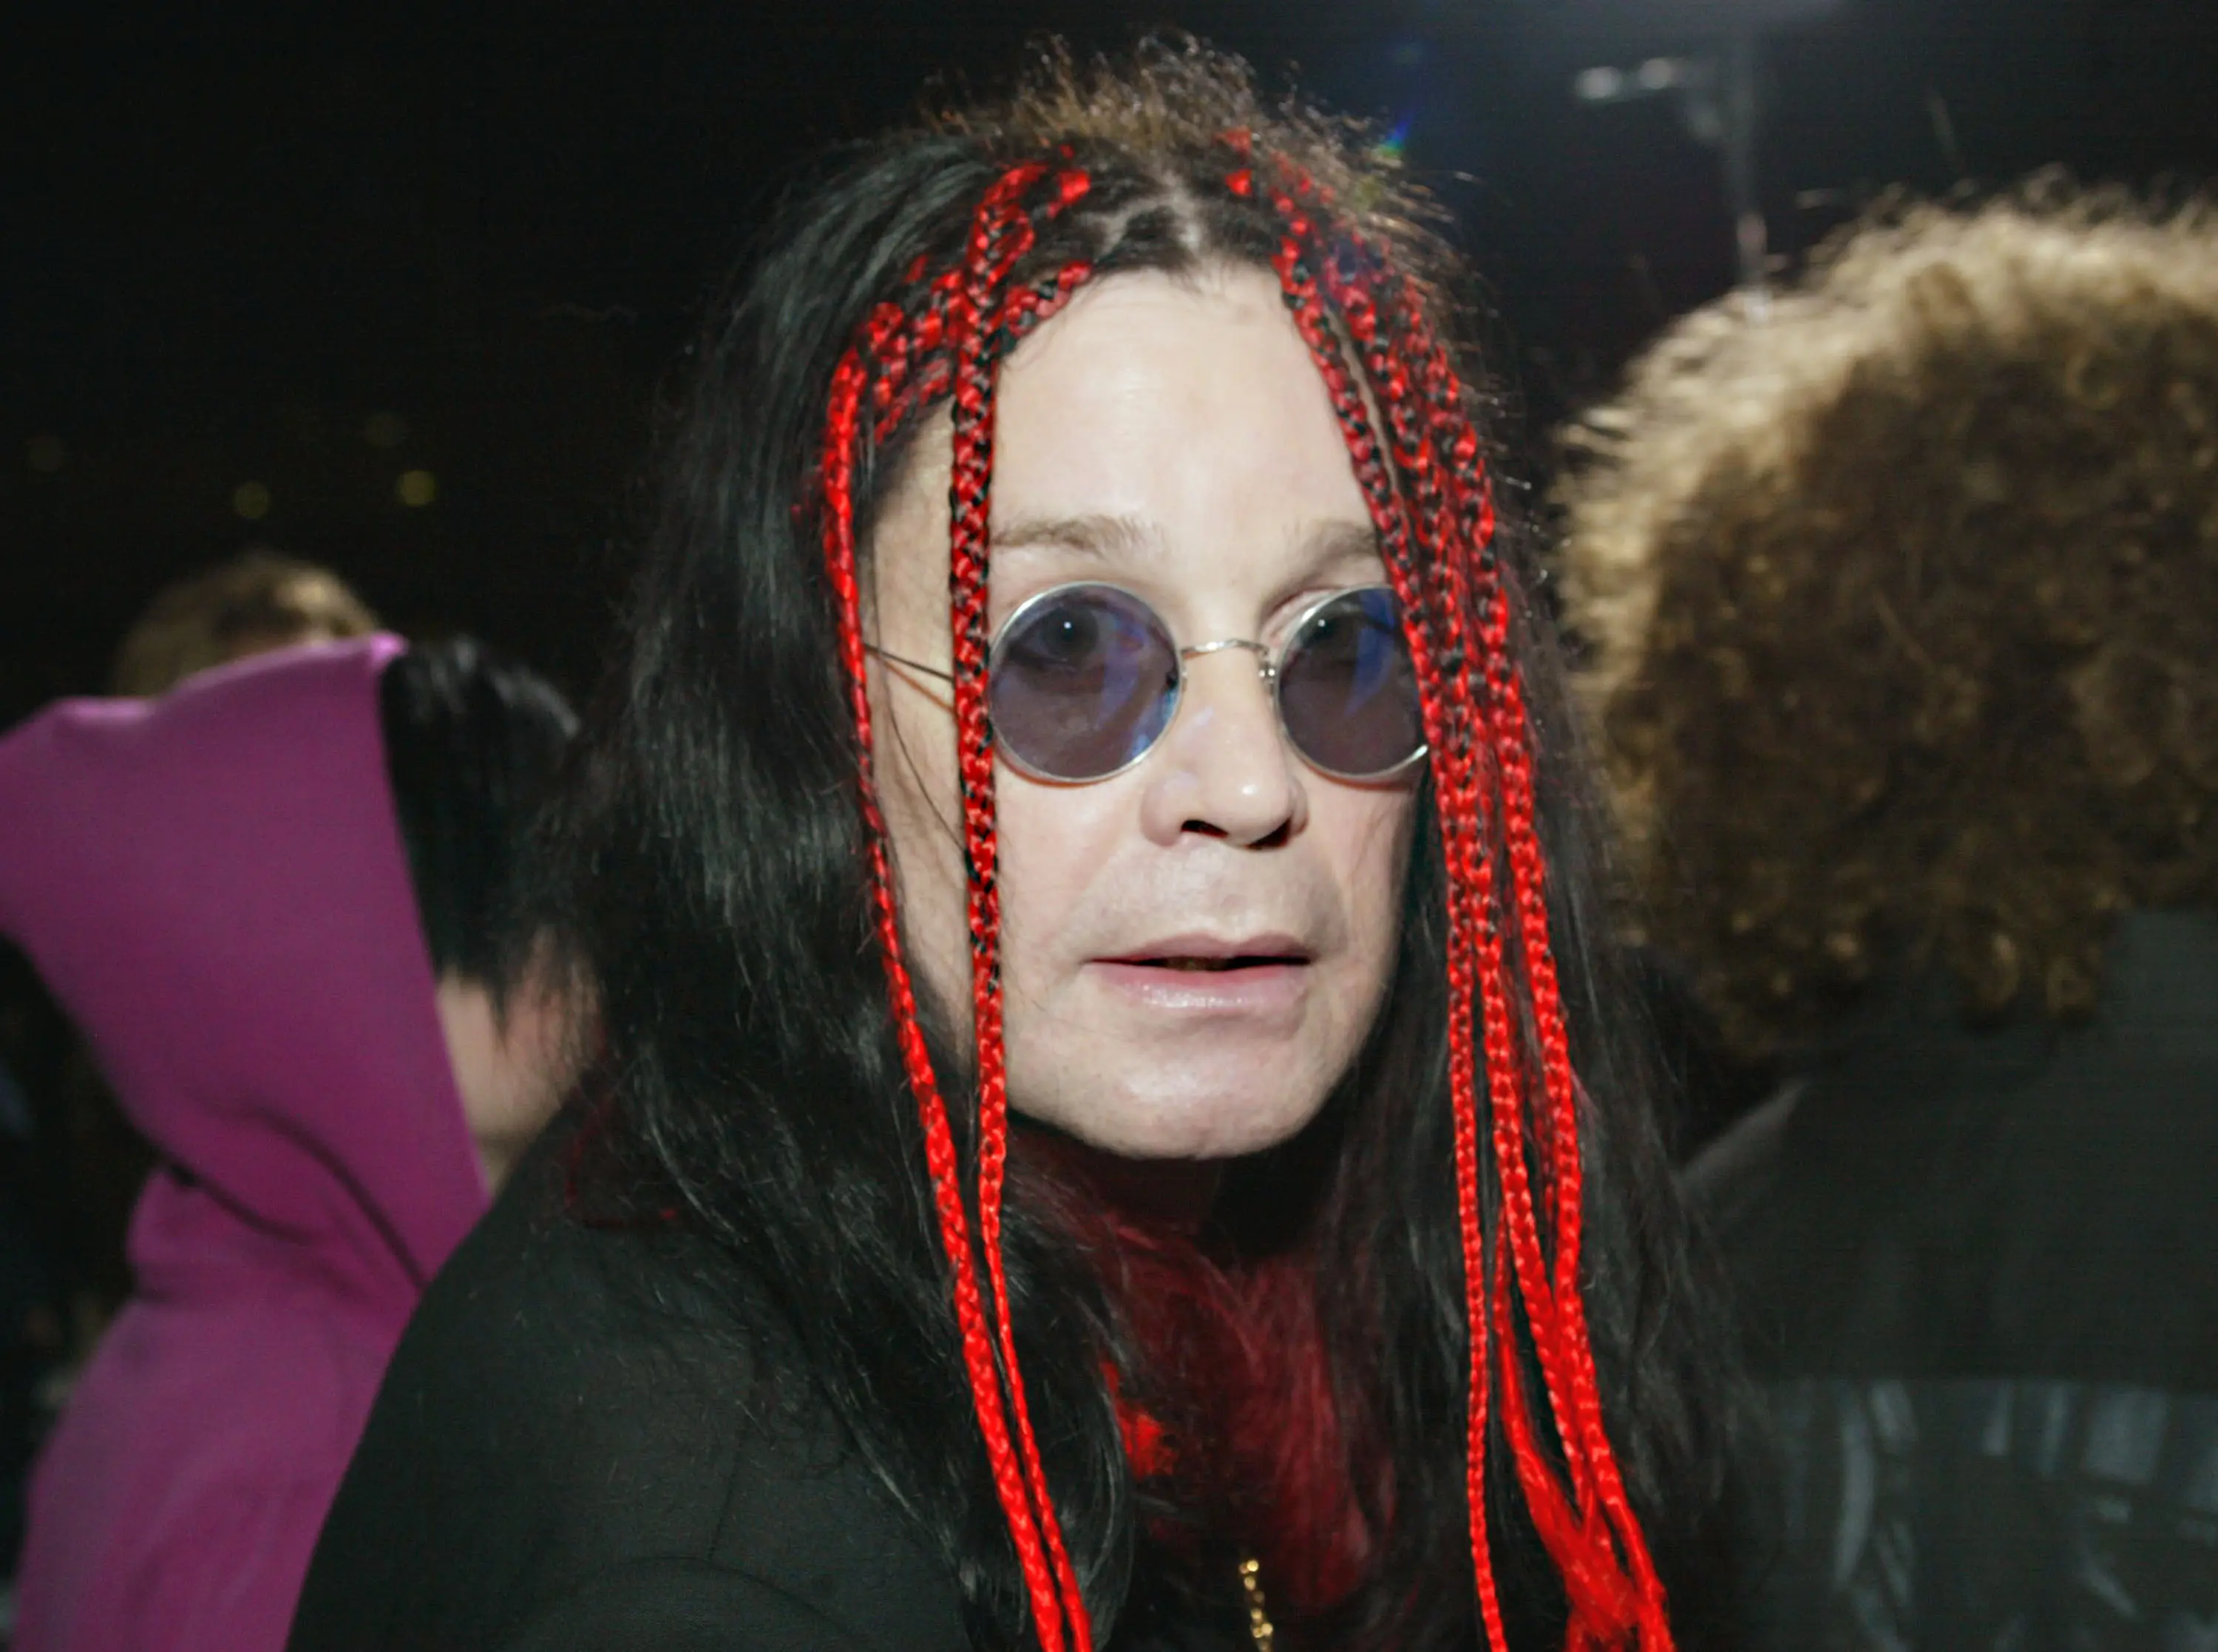 Ozzy Osbourne. (AFP/FREDERICK M. BROWN / Getty Images North America)